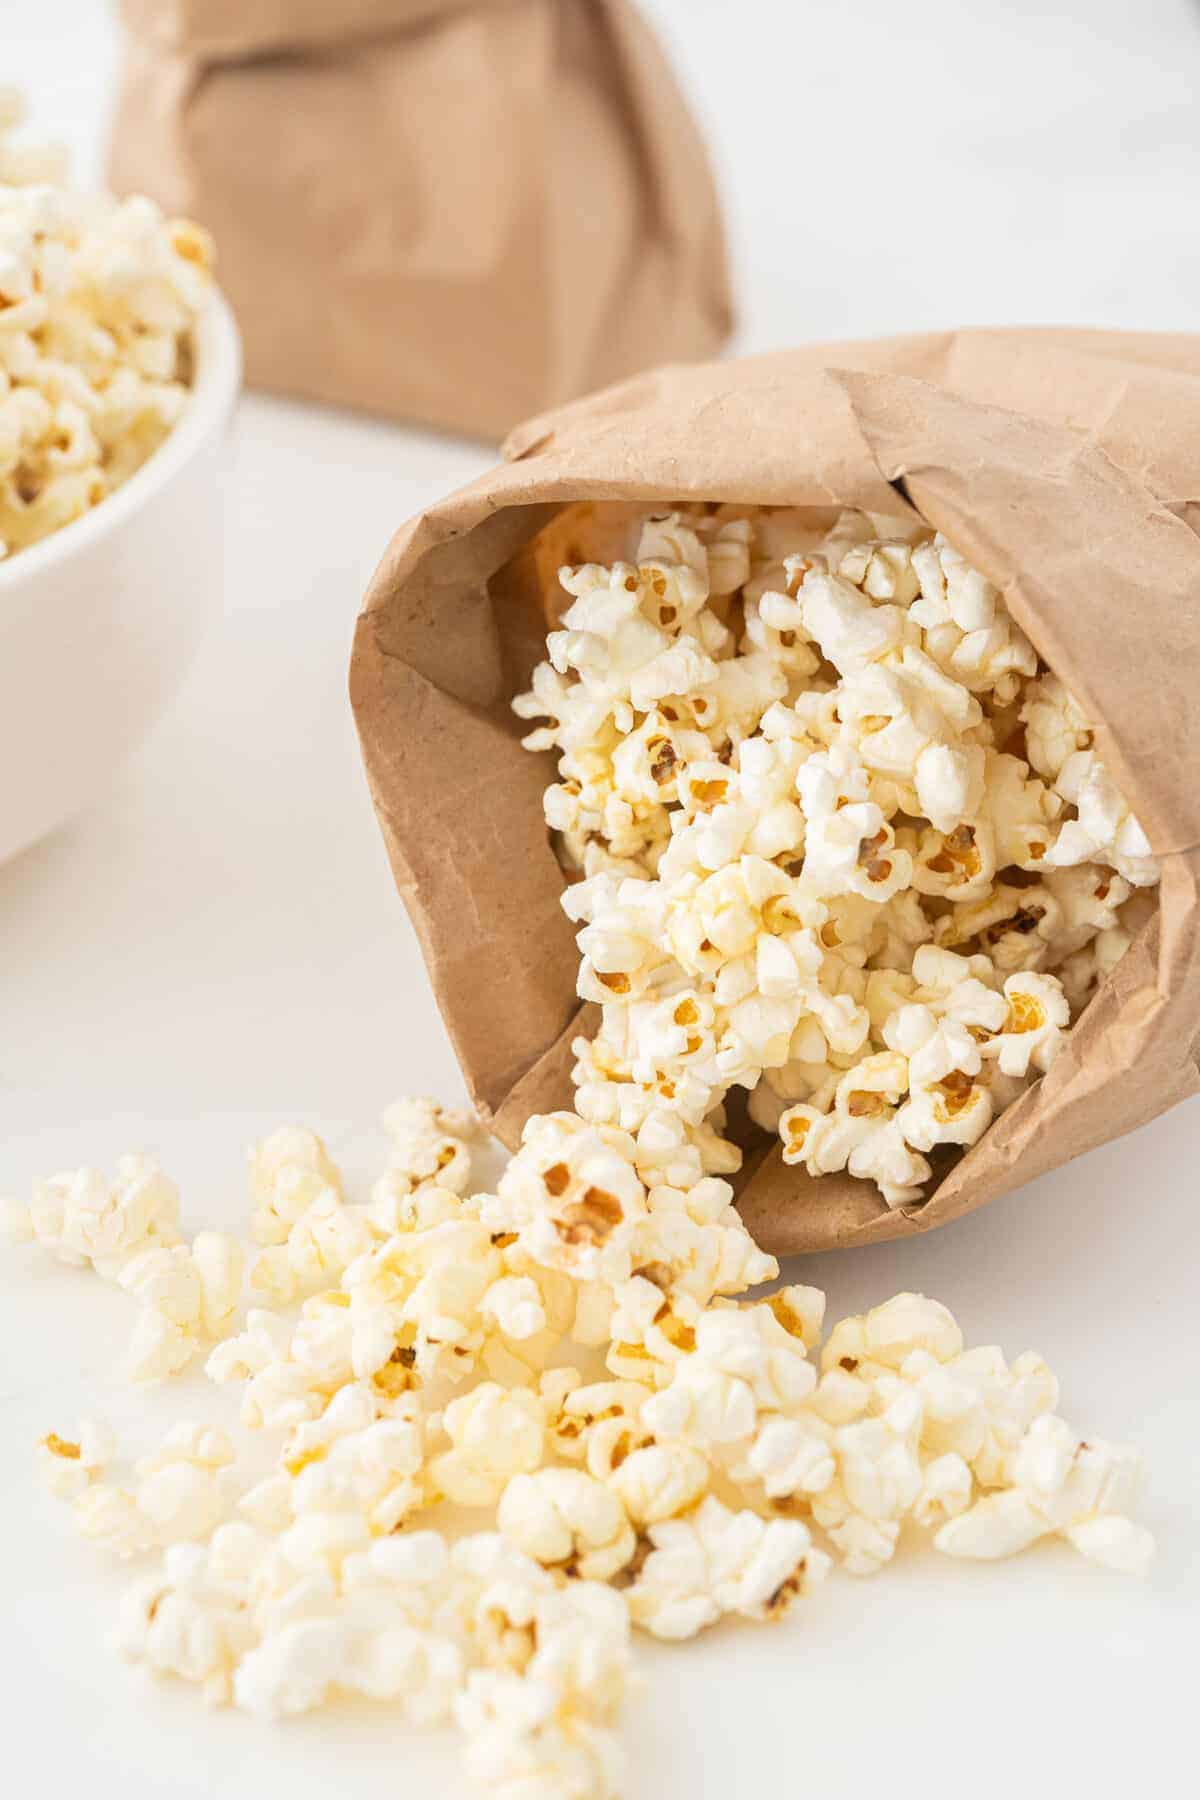 kettle corn in a brown paper bag